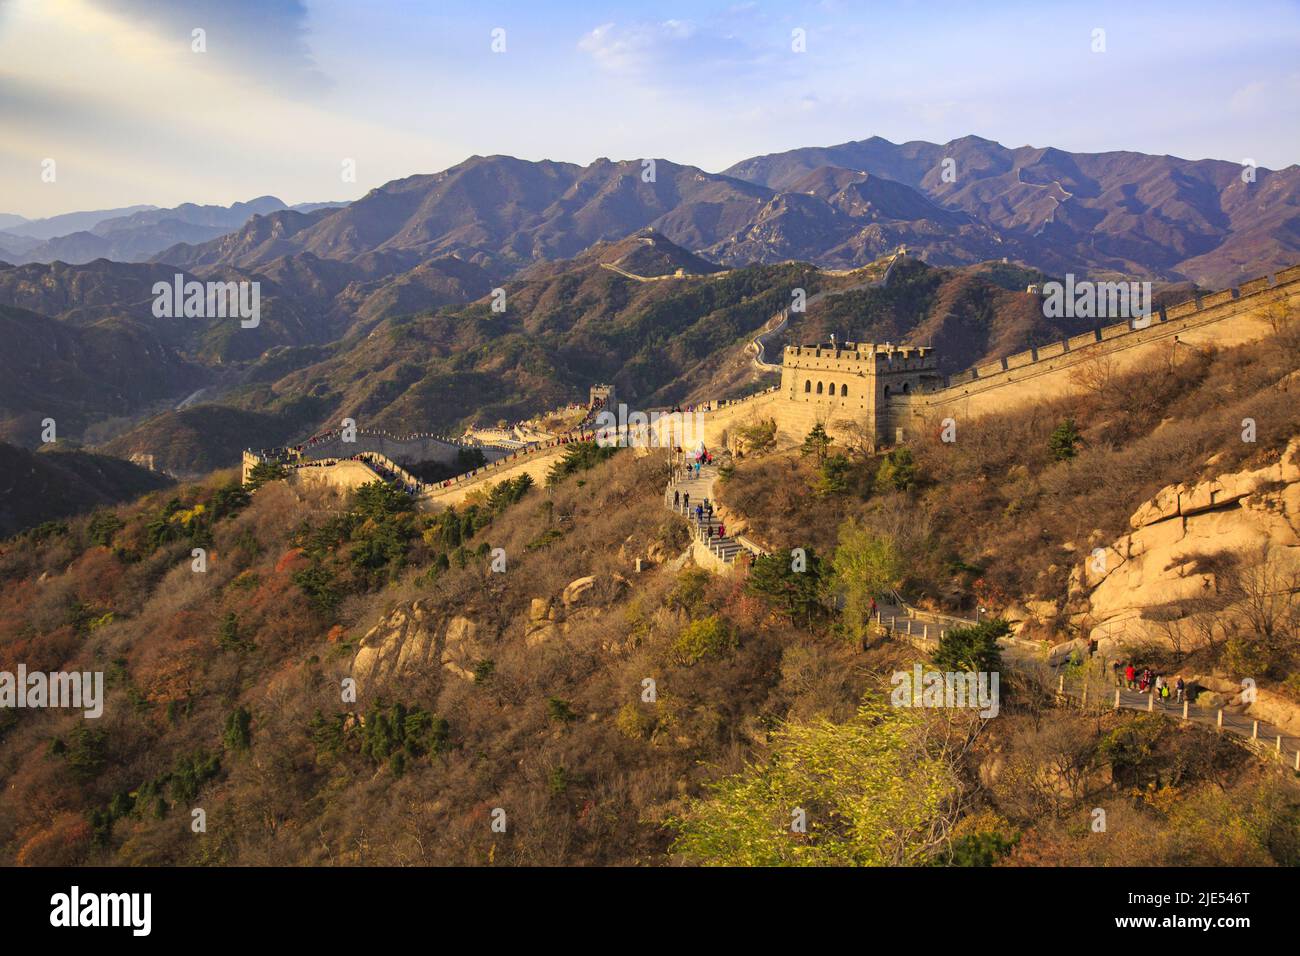 Beijing badaling the Great Wall ancient buildings towers Stock Photo